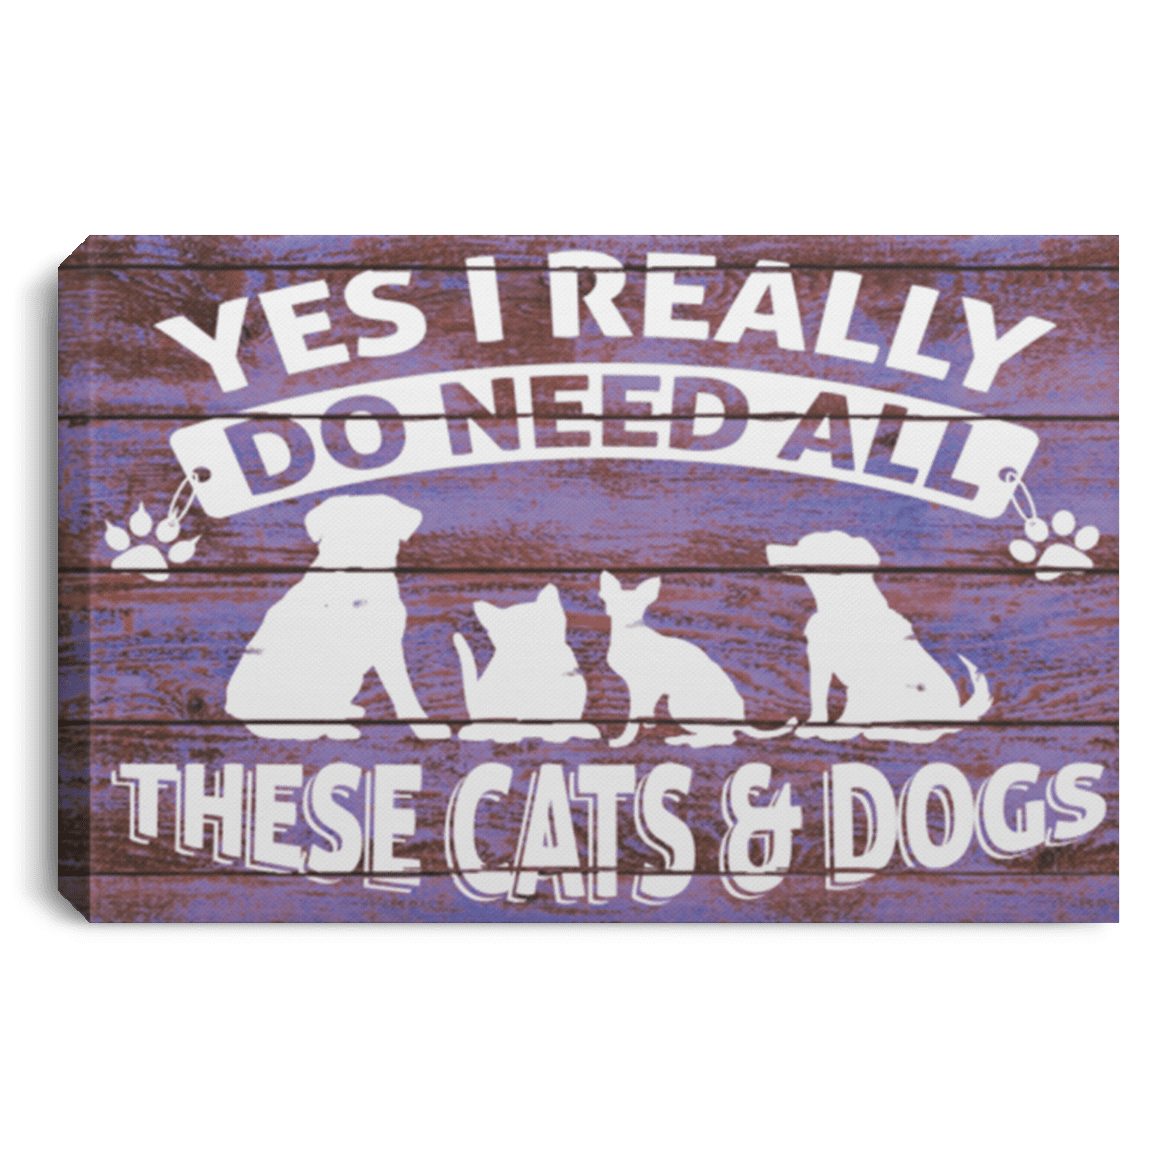 Yes I Need All These Cats and Dogs - Wall Canvas.